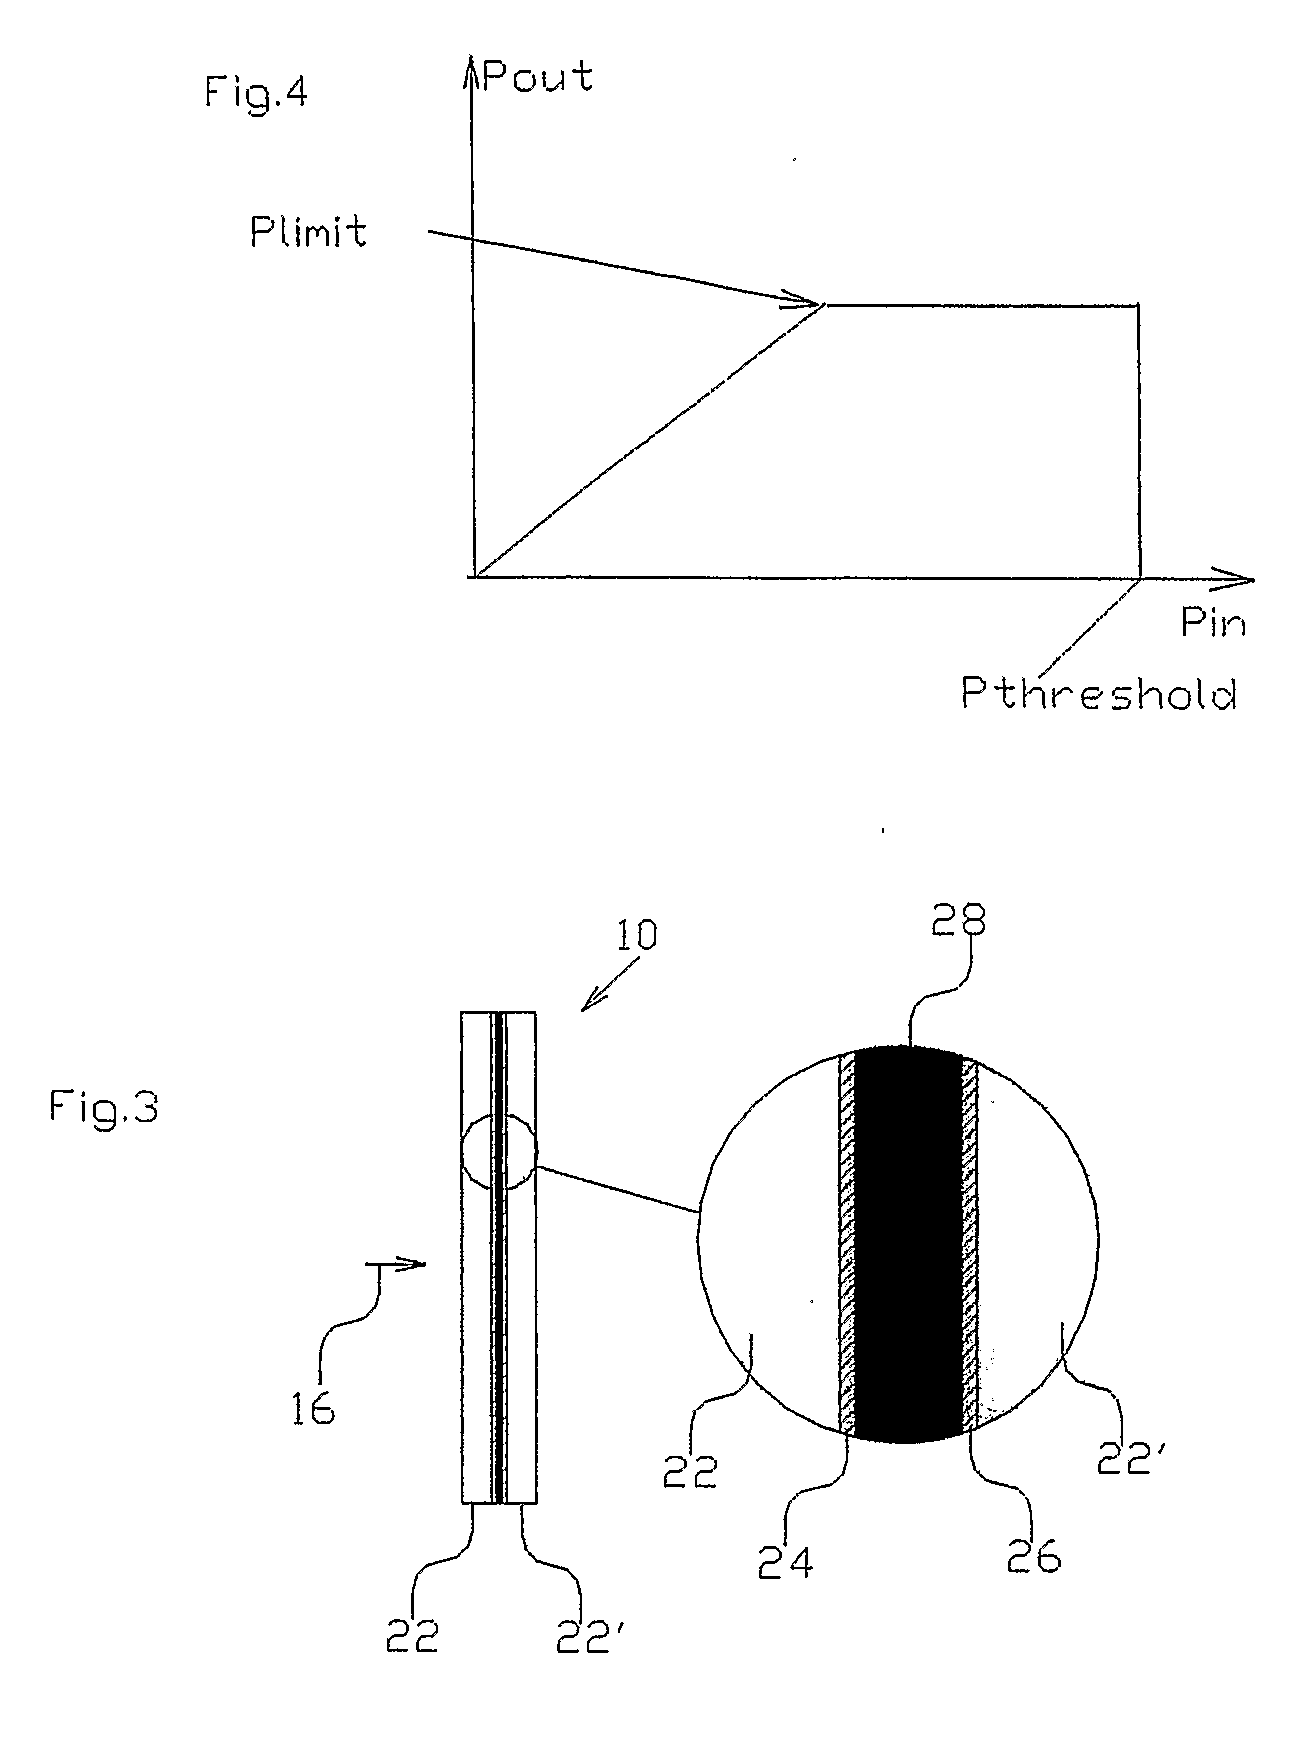 Optical power limiting and switching combined device and a method for protecting imaging and non-imaging sensors